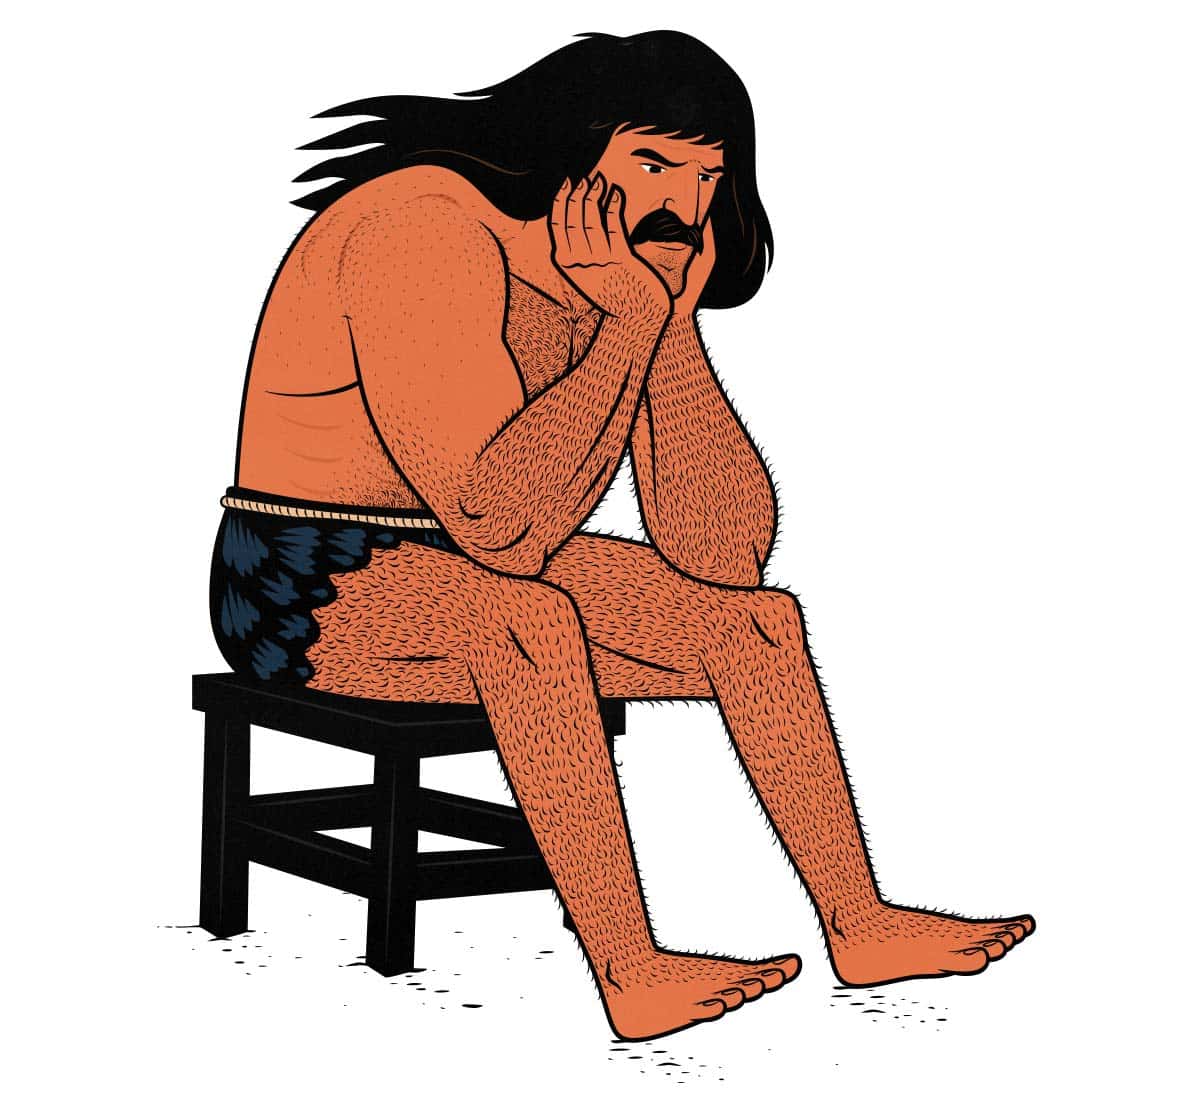 A barbarian wallowing in self despair after bulking up. Illustrated by Shane Duquette.